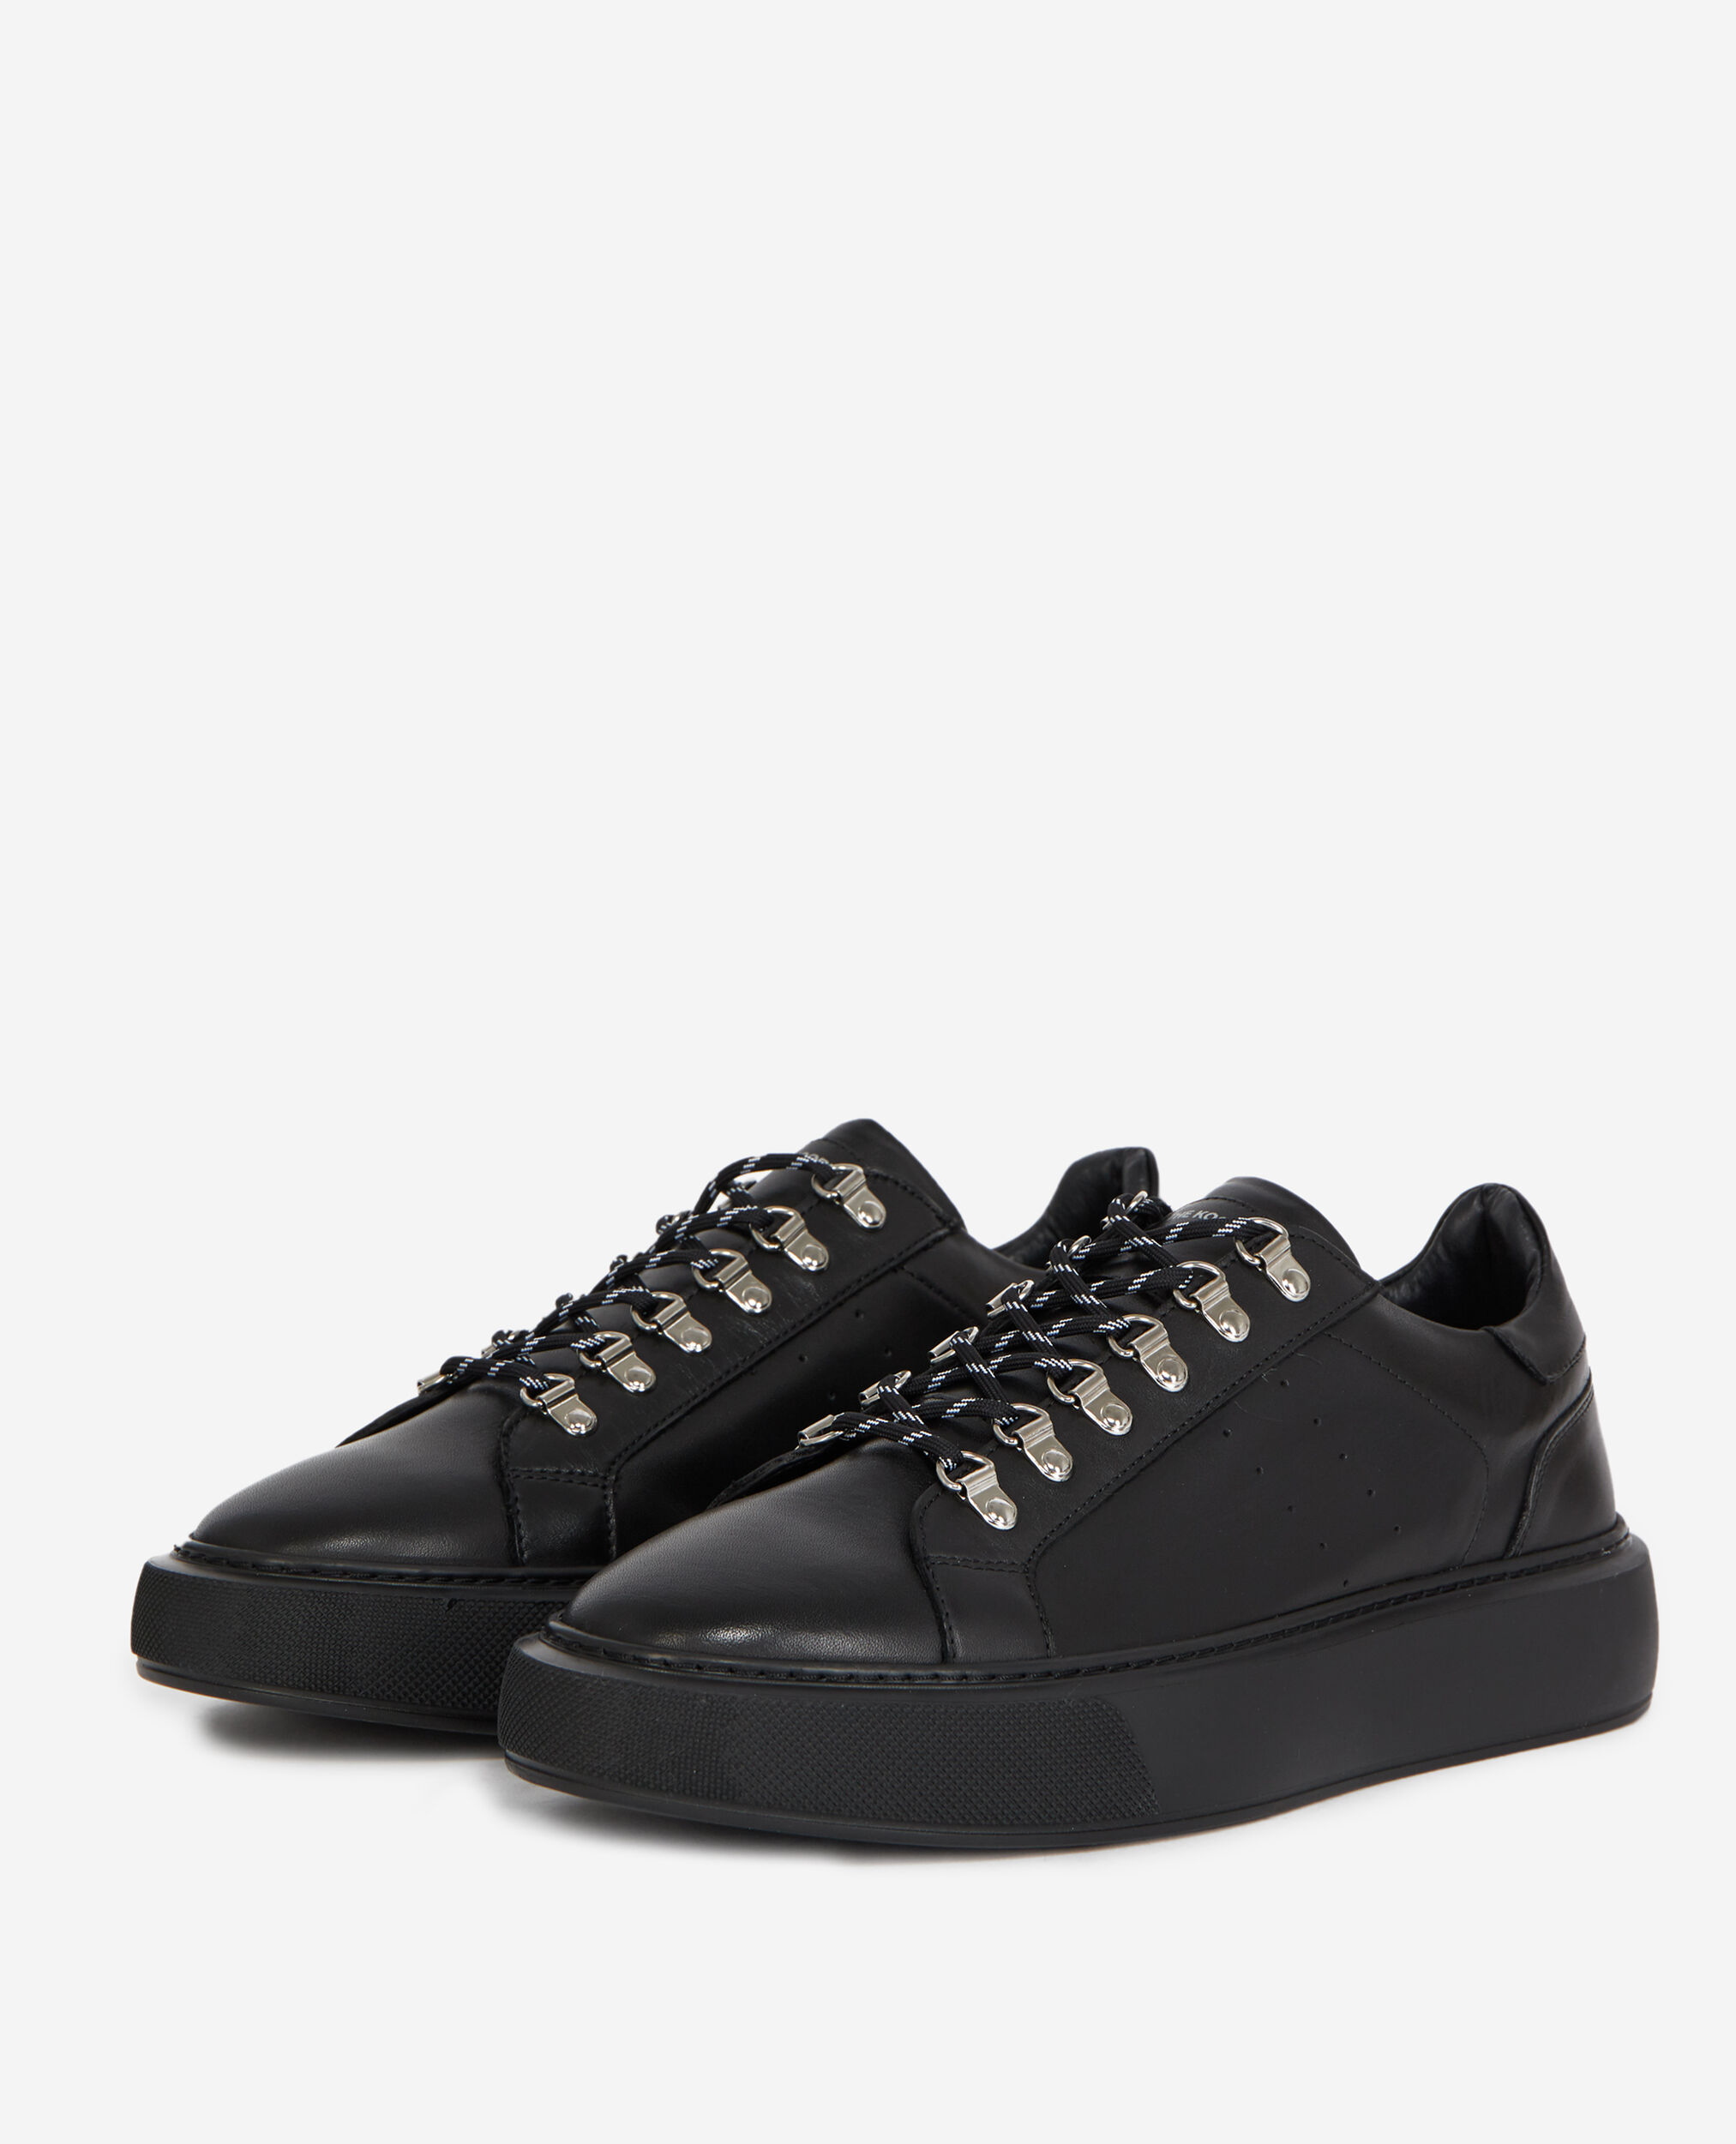 Wedge black sneakers in leather with eyelets, BLACK, hi-res image number null